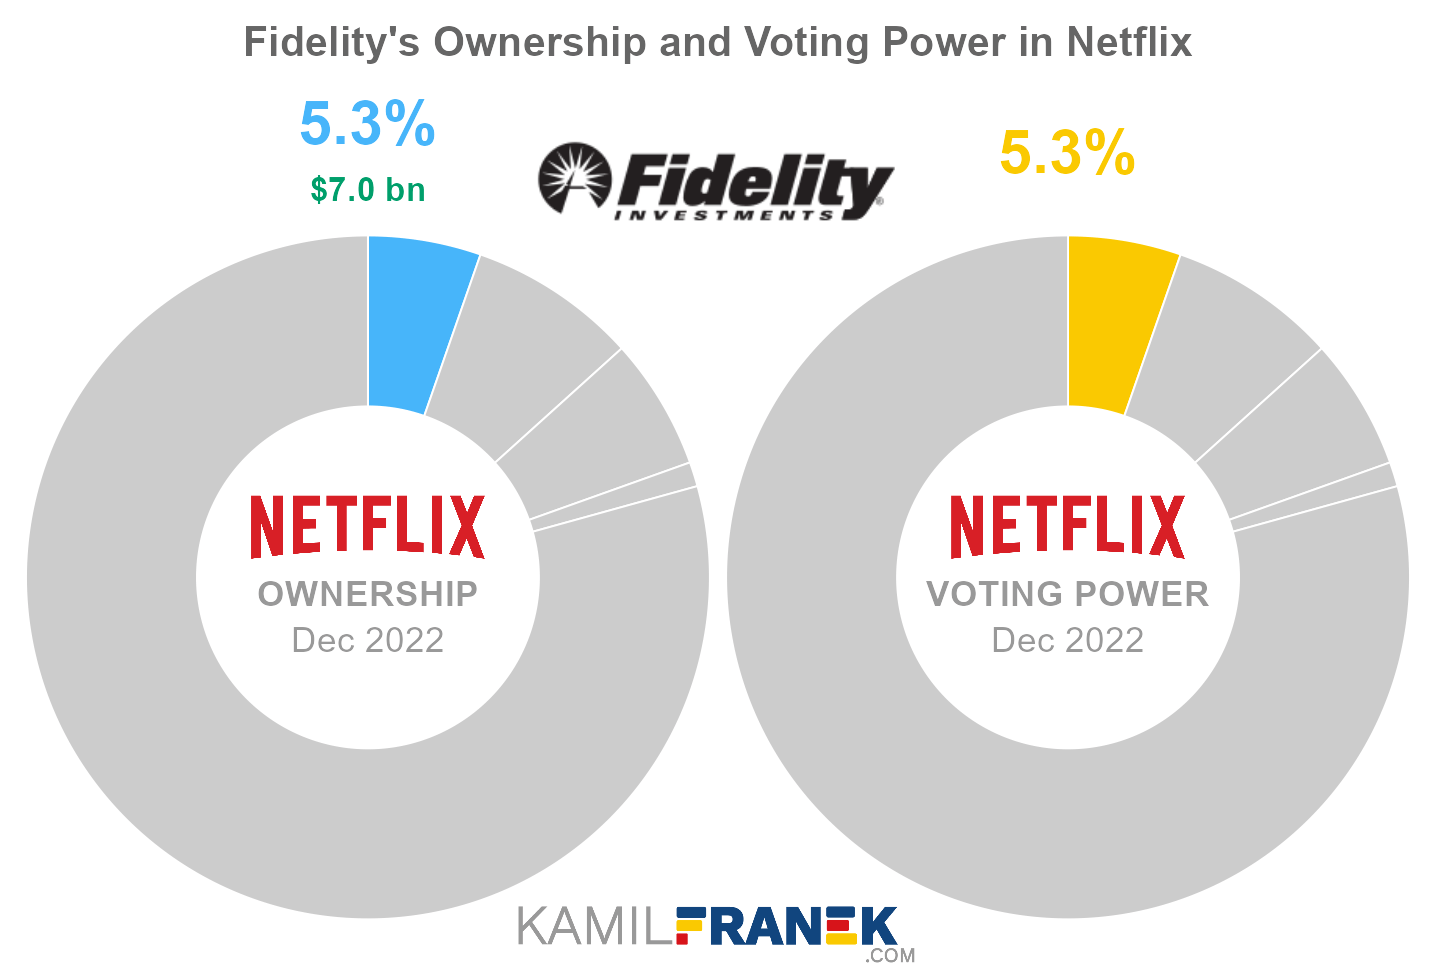 Fidelity's share ownership and voting power in Netflix (chart)